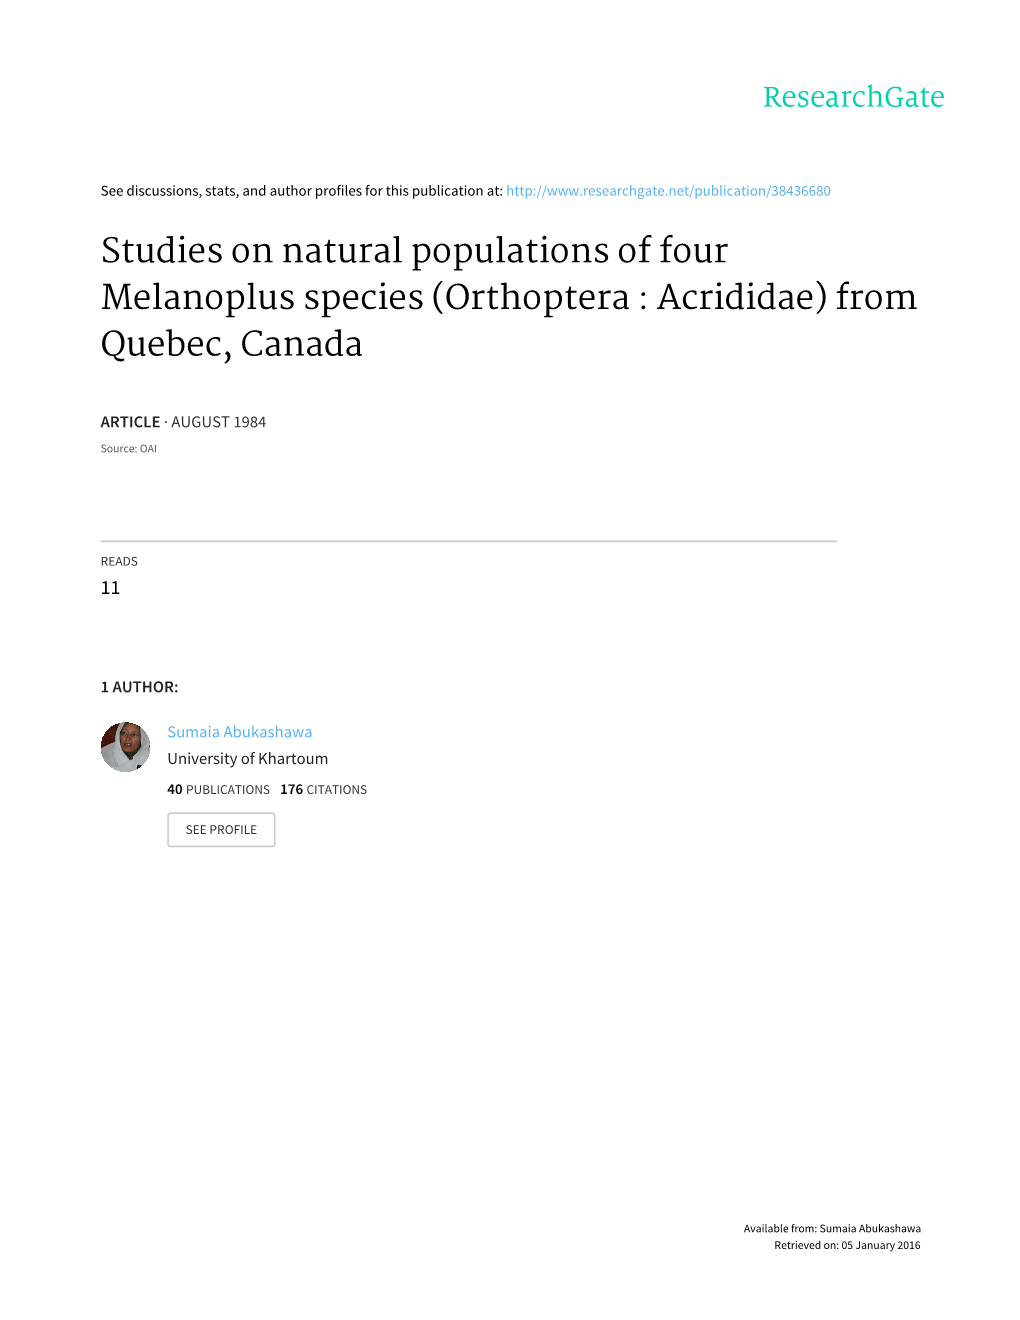 Studies on Natural Populations of Four Melanoplus Species (Orthoptera : Acrididae) from Quebec, Canada